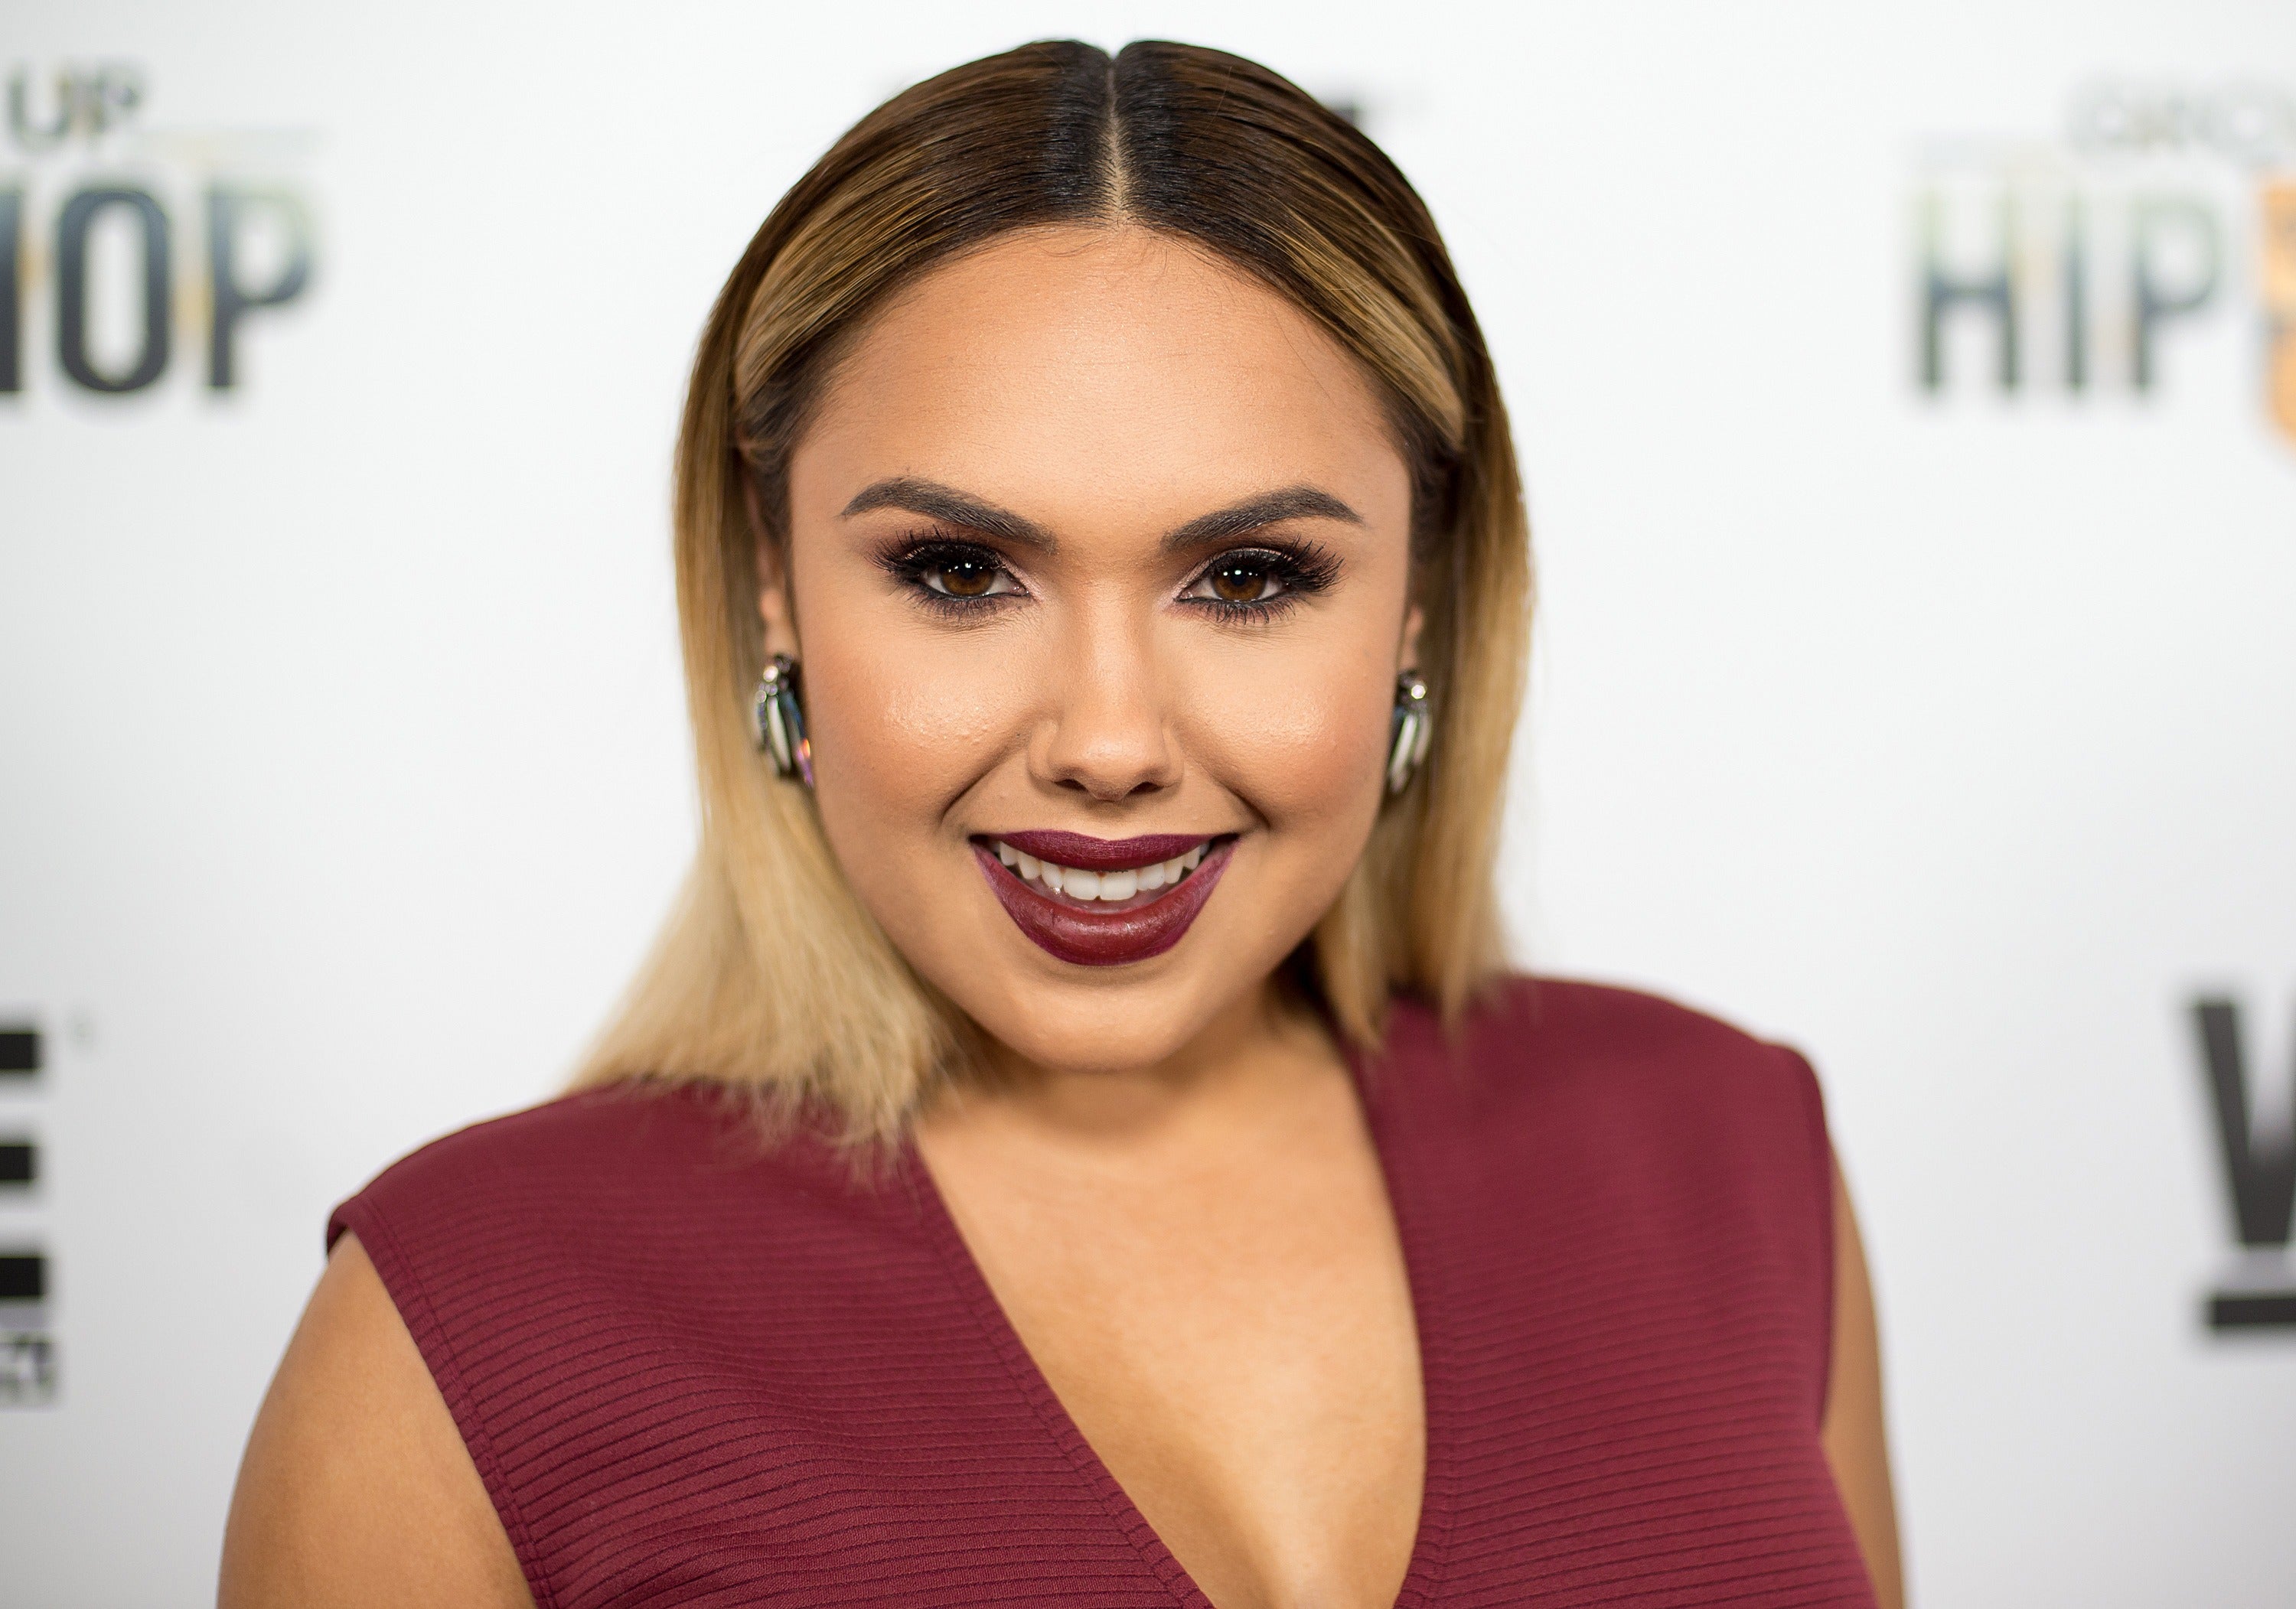 WATCH: 'Growing Up Hip-Hop' Star Kristinia DeBarge Consoles Briana Latrice After Domestic Violence Nightmare
